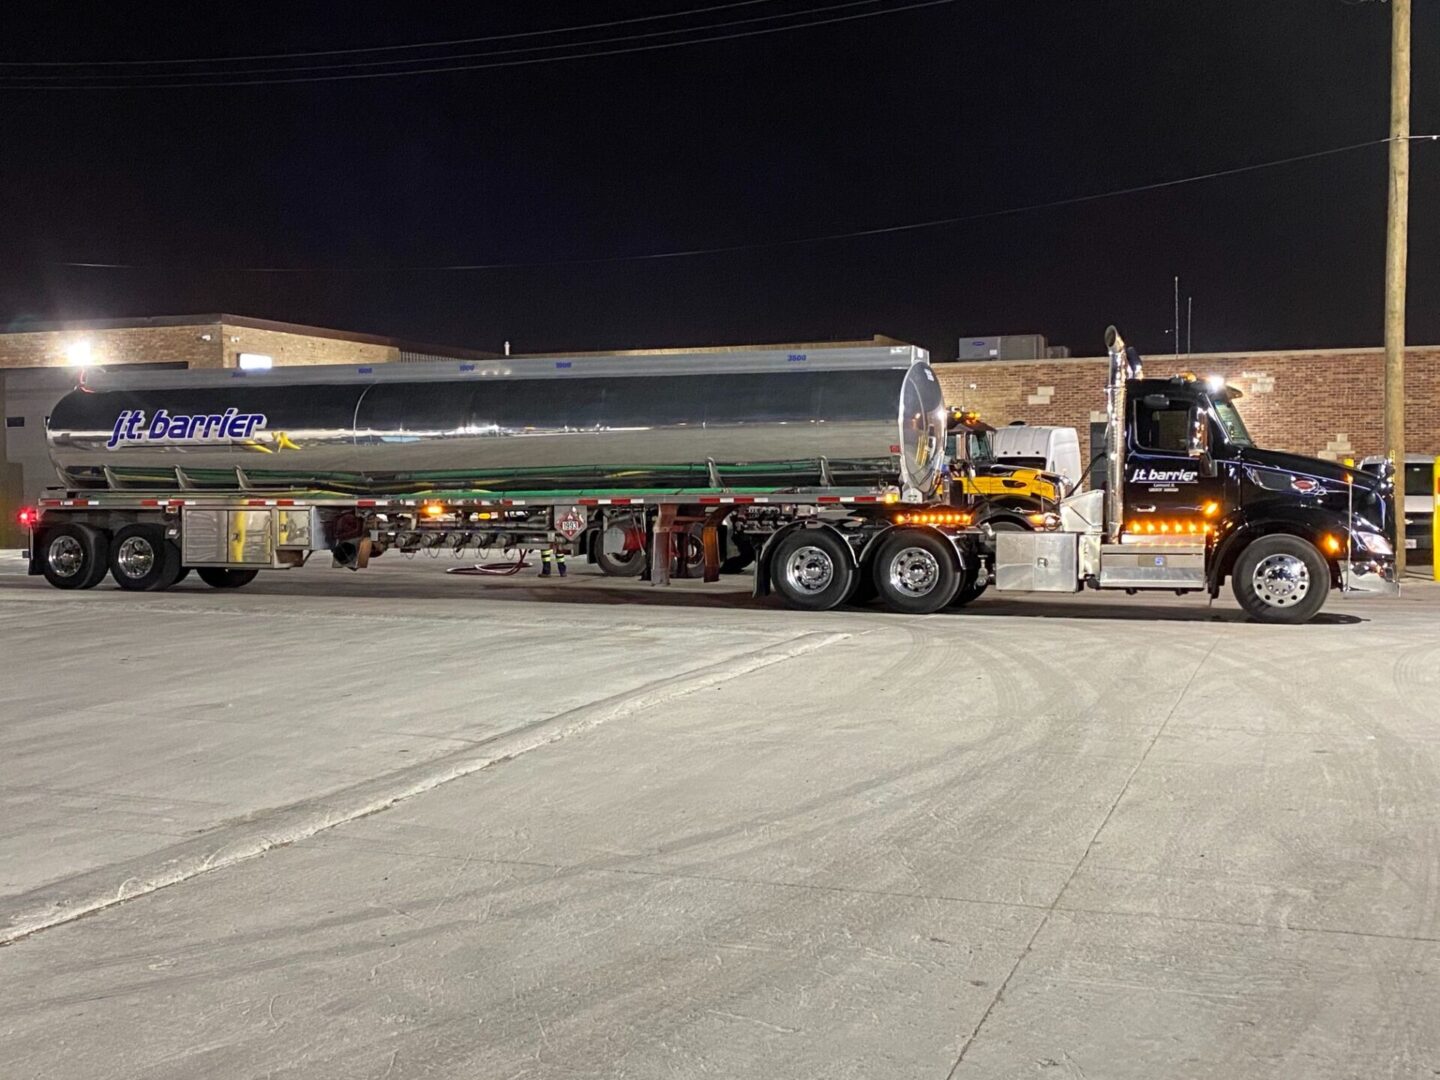 A large tanker truck parked in a parking lot at night.